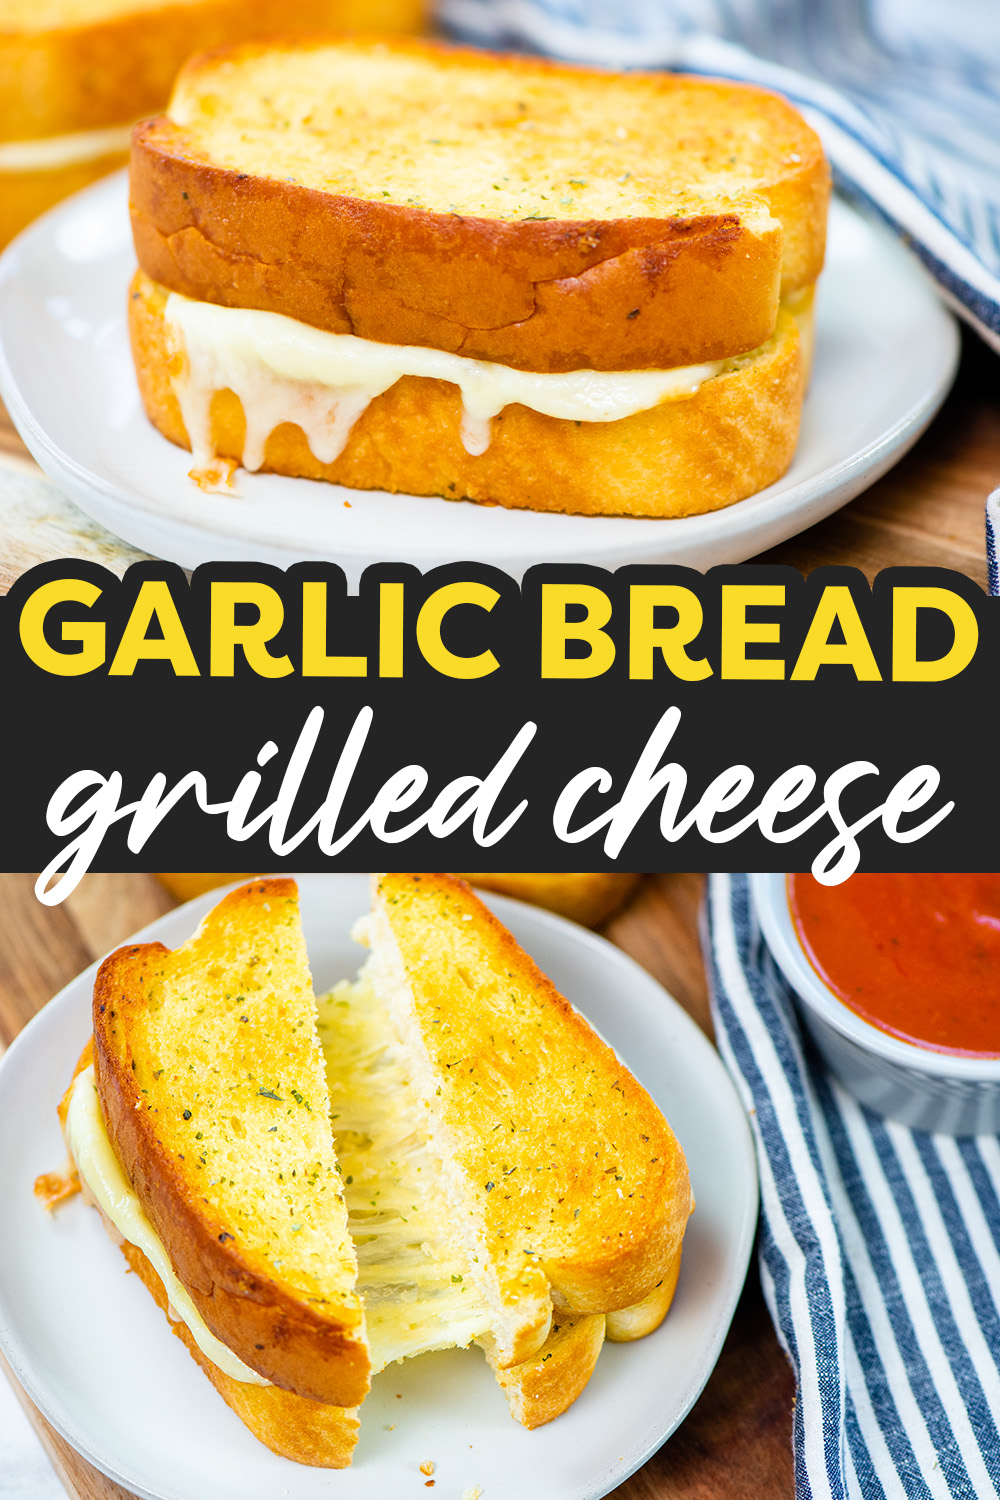 This garlic bread grilled cheeese has a great toasted texture and is flavored so well for a simple sandwich.